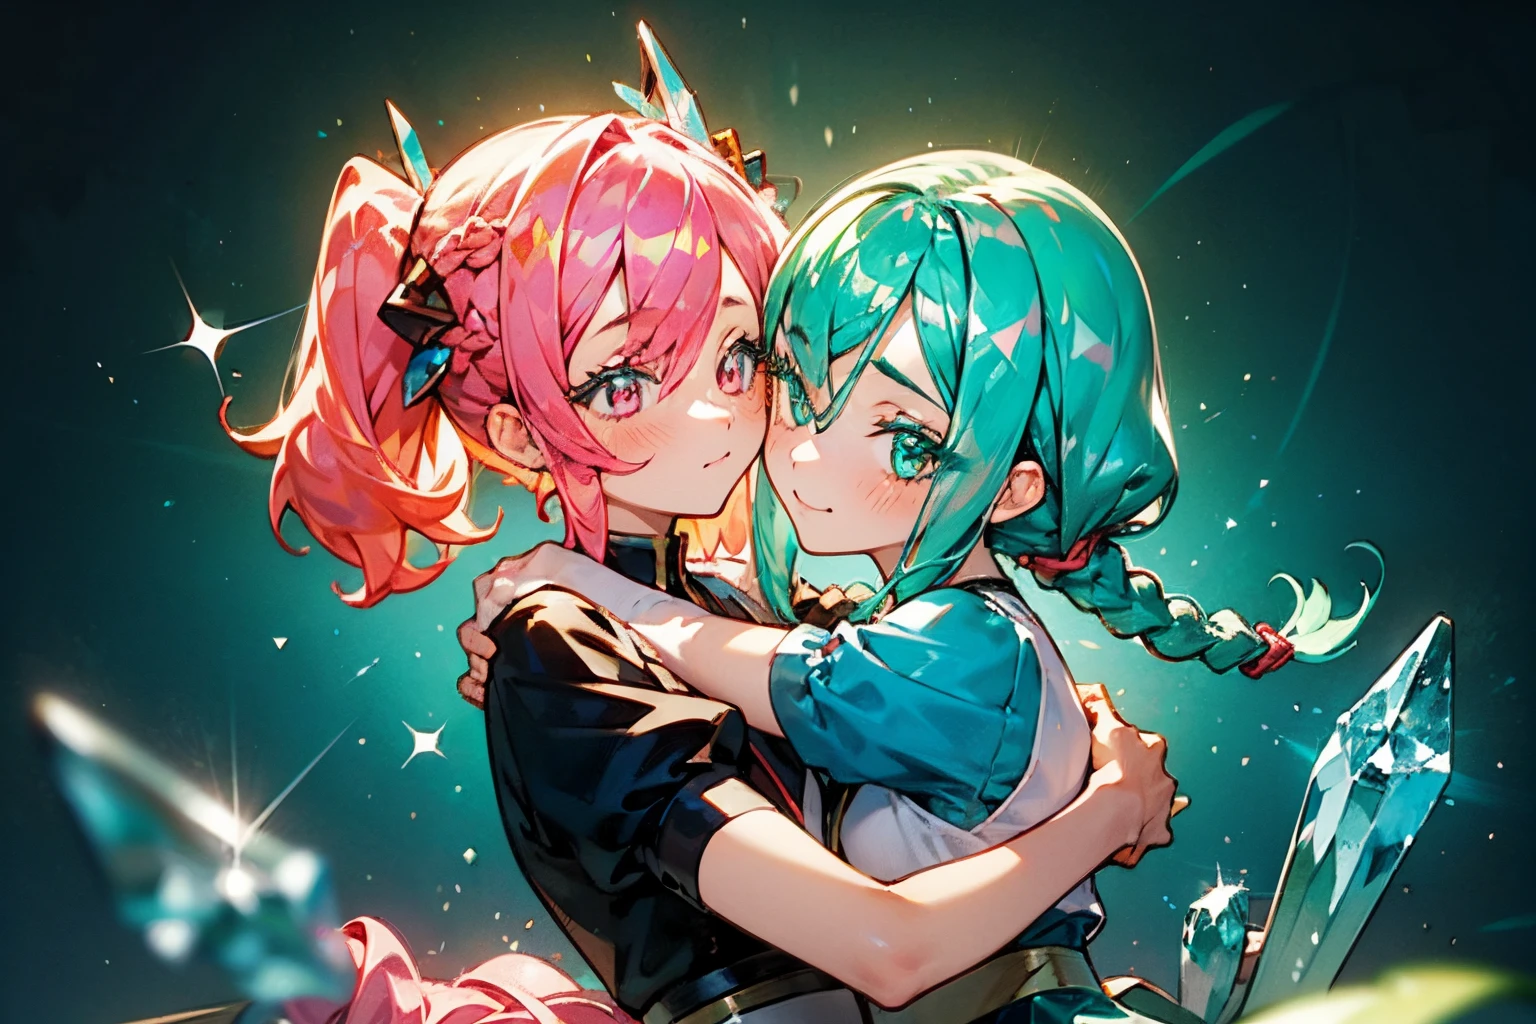 Close-up of two girlfriends with different precious hair, yuri, The first girl has blue hair in a ponytail and pink eyes, the second girl has green-turquoise hair collected in two braids turning into horns and bureaucratic eyes, (((Two girls hugging))), sisters ((in the style of Ichikawa Haruko)), Hauskie no to that, The Land of Gemstones, Original character, ((tmasterpiece)), (((beste-Qualit))), ((ultradetailed)), ((illustartion)), [The light effect of realism], eye shadow, (fantasy style), Simple background, illustartion, 2 girls, sly look, Majestic view (multi-colored hair, Hair gradient, Hair color from blue to peach, without bangs, (Side bangs), curly curl on the cheek, hairstyle: high ponytail, long tail), The eyes are crimson-red, Environment change scene, wide eyes, Lashes, side glance, Crystal hair, Glowing Hair, shirt with collar, galaxy, Additional lighting, uniform, tie, puffy short sleeves, Shorts, Smile, puffy short sleeves, Puffy armbands, Shirt, short sleeve, sparkle, Small flat chest, Girl with two long green pigtails and a happy face, wide eyes, turquoise hair, Turquoise textured hair, Double Long Bangs, Green eyes, (turquoise two pigtails), (braids), ((Two-braid hairstyle)), Two pigtails, turquoise horns